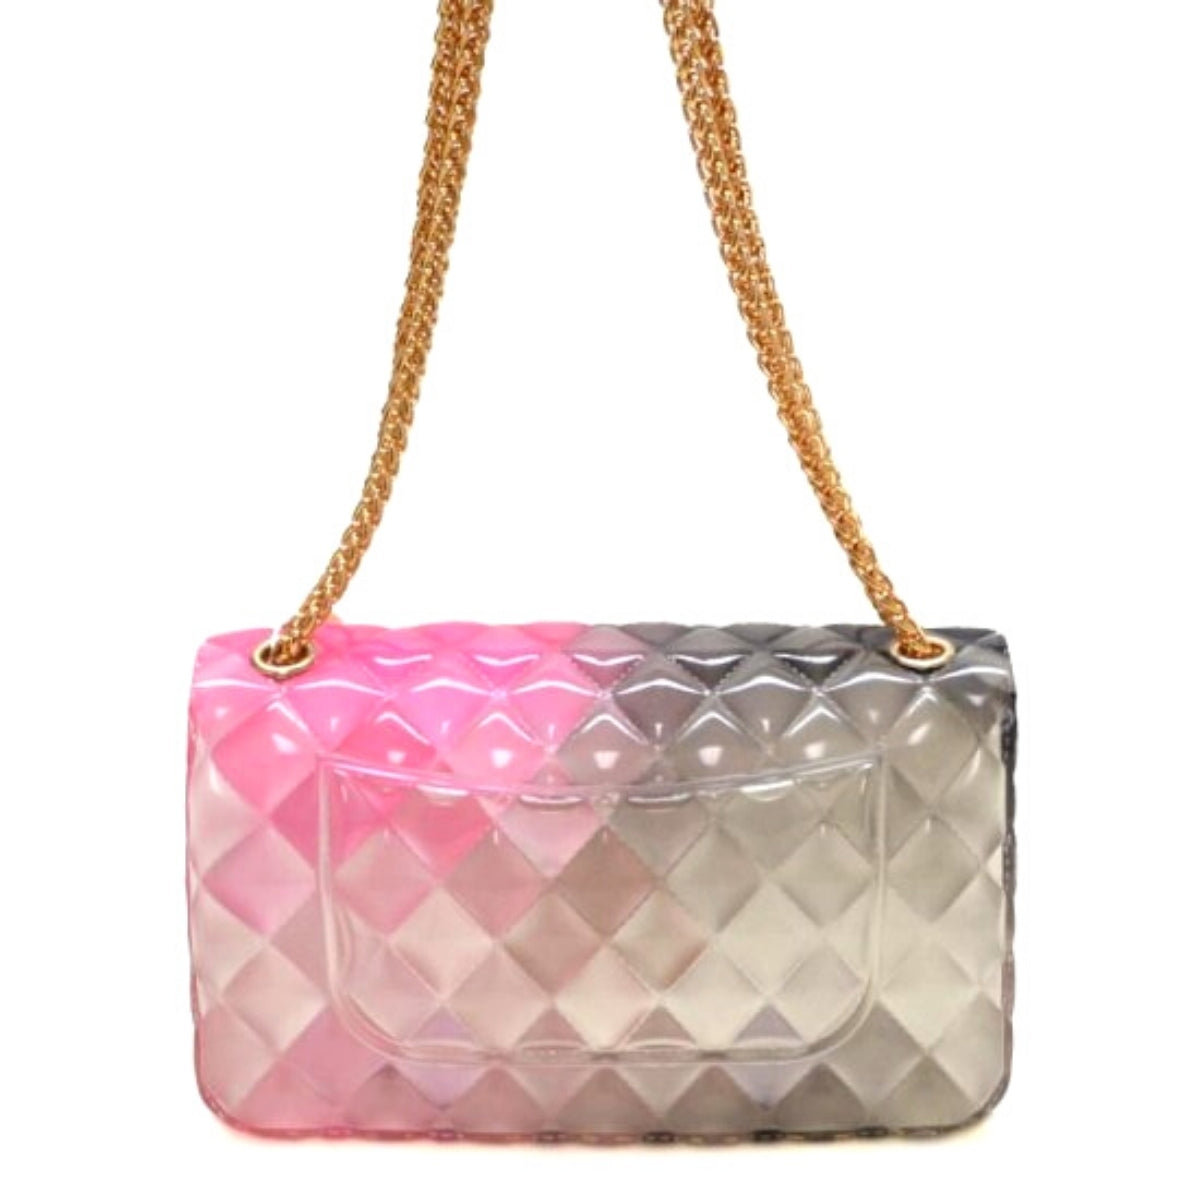 Black and Pink Quilted Jelly Crossbody